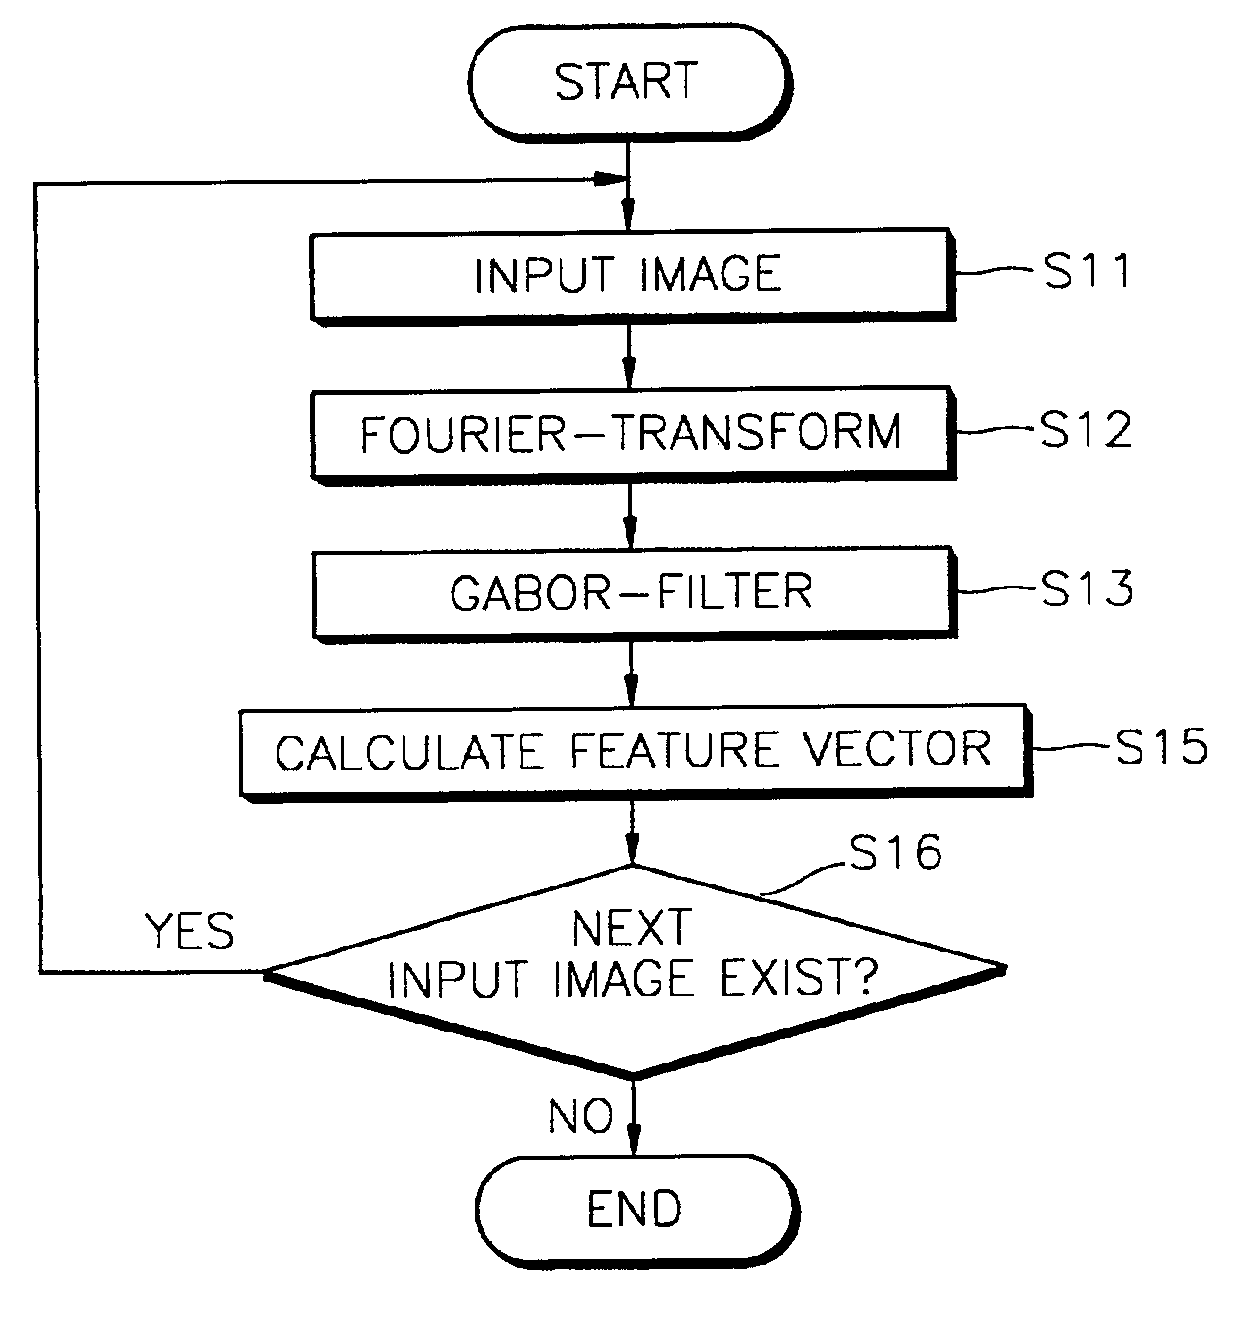 Texture description method and texture-based image retrieval method using Gabor filter in frequency domain